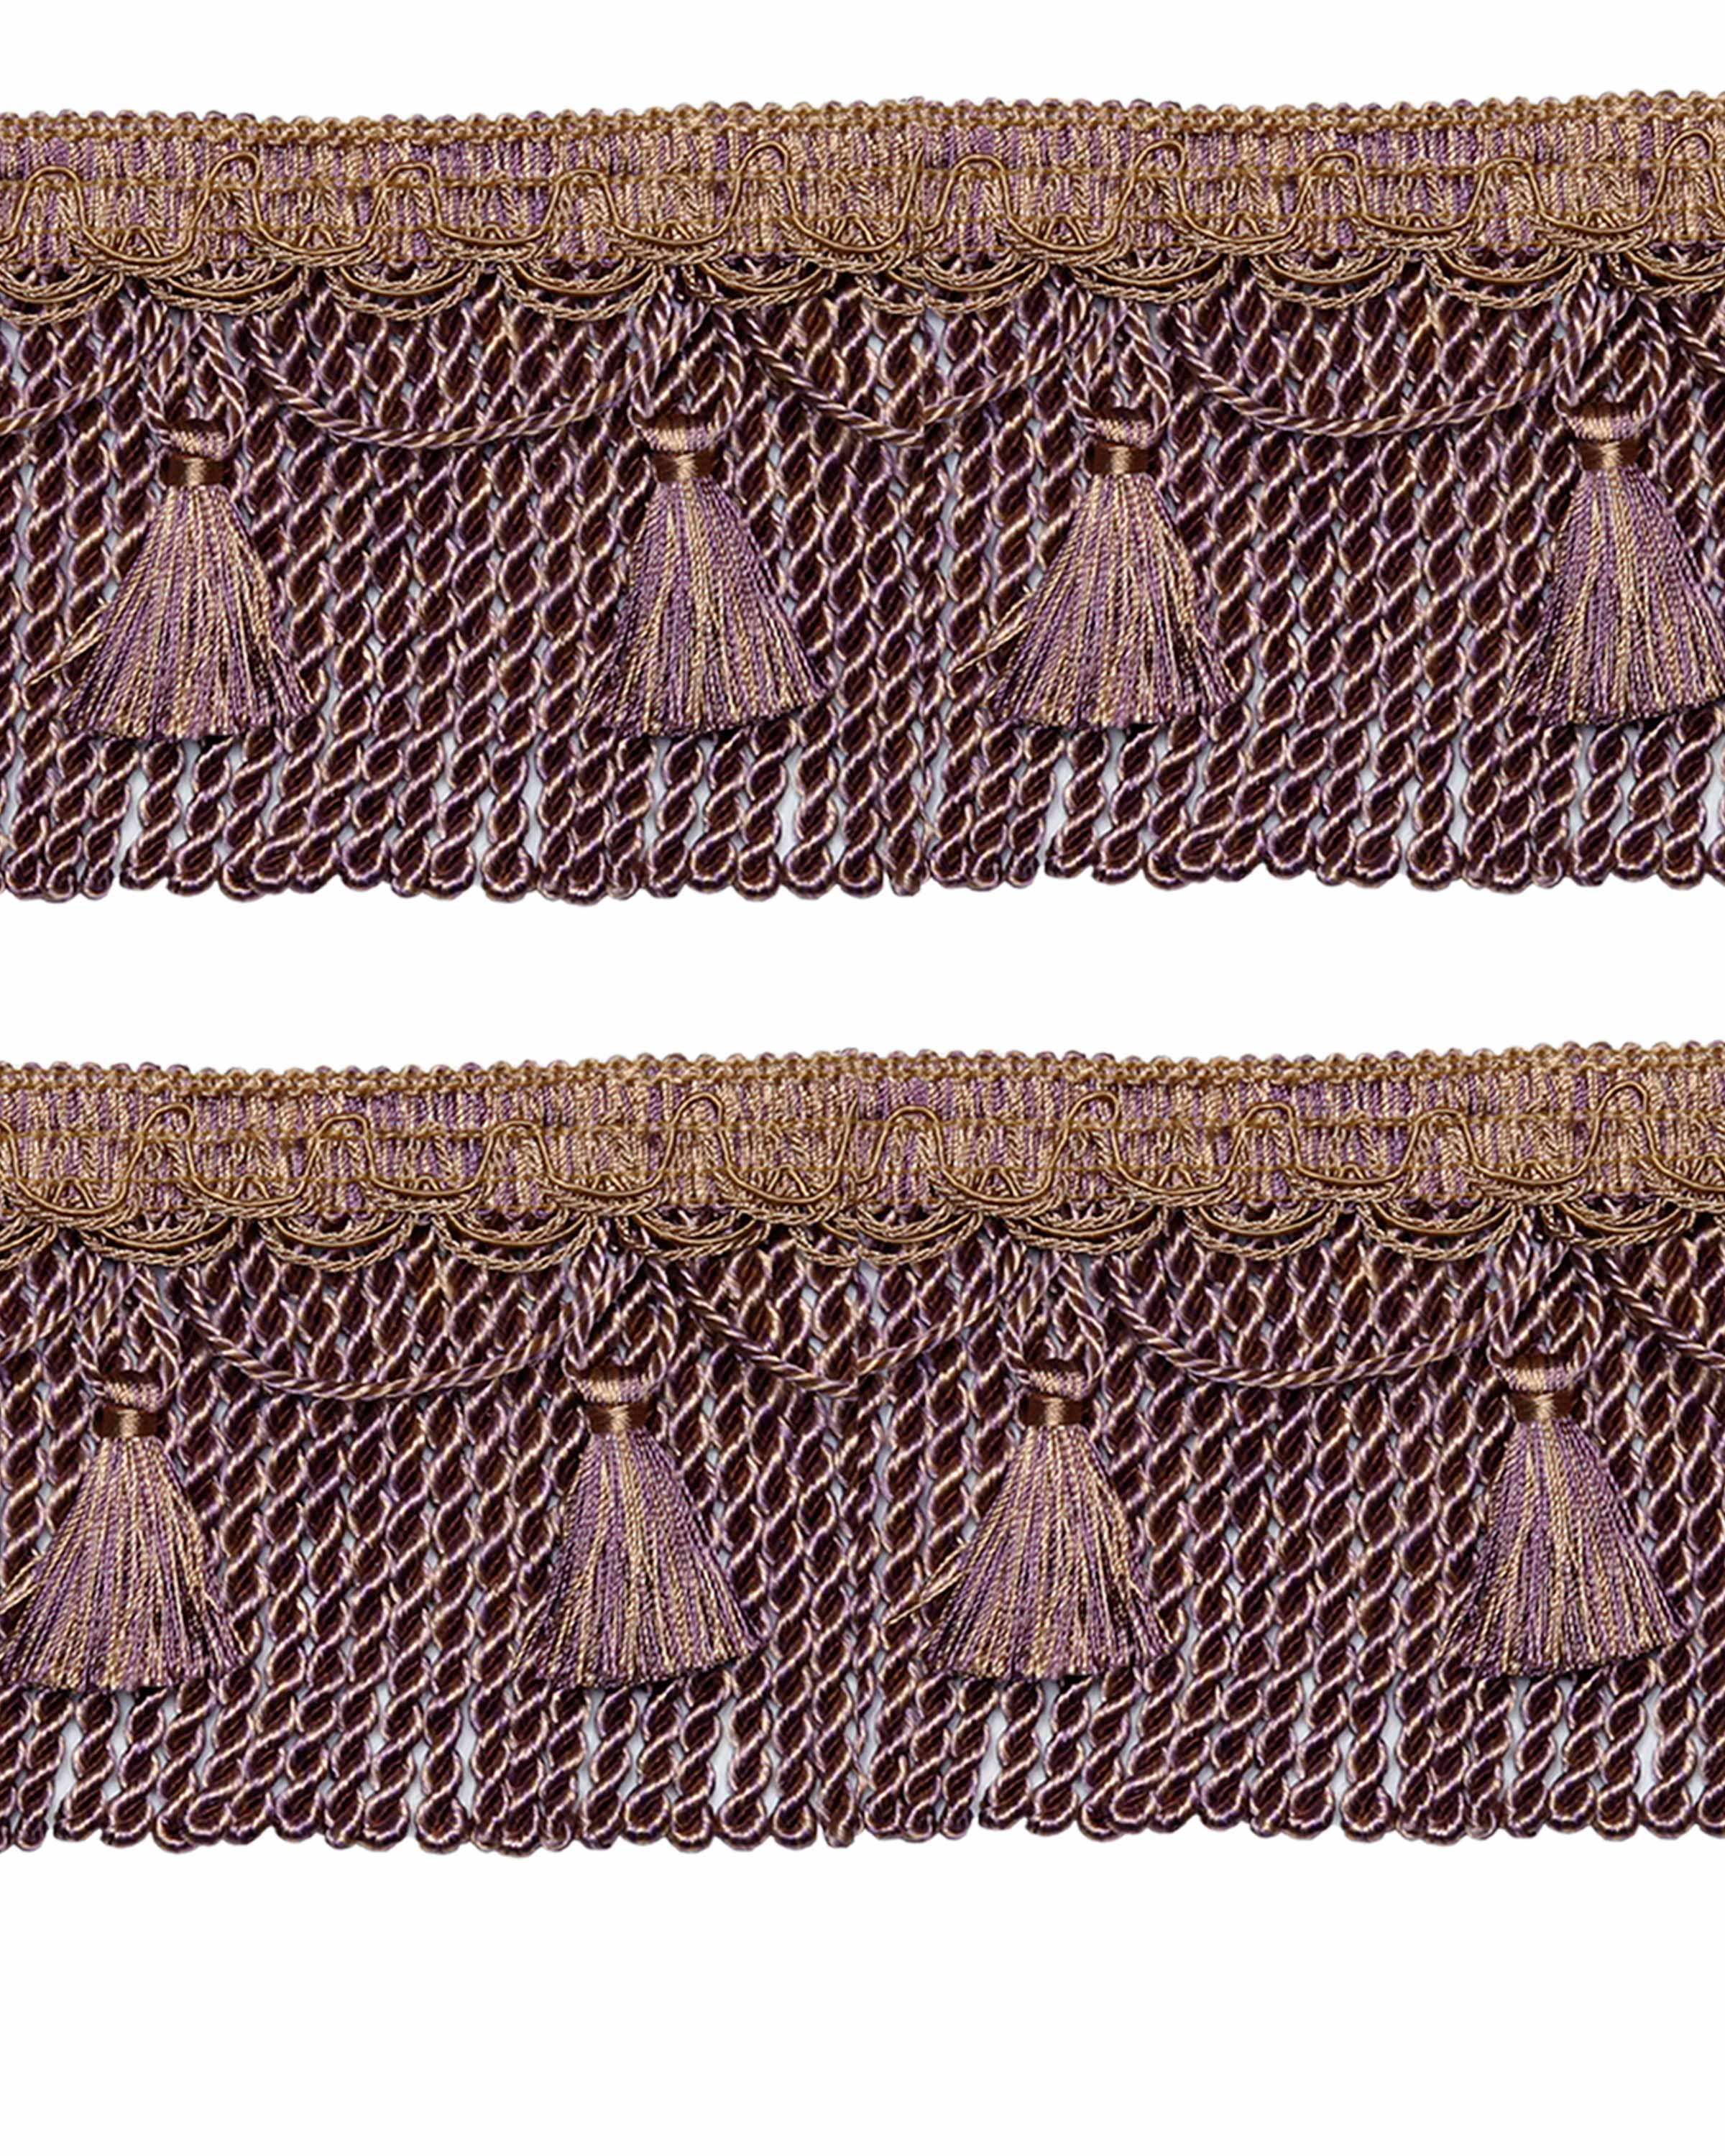 Bullion Fringe Cord on Braid with Scalloped Tassel - Purple / Gold 105mm Price is for 5 metres